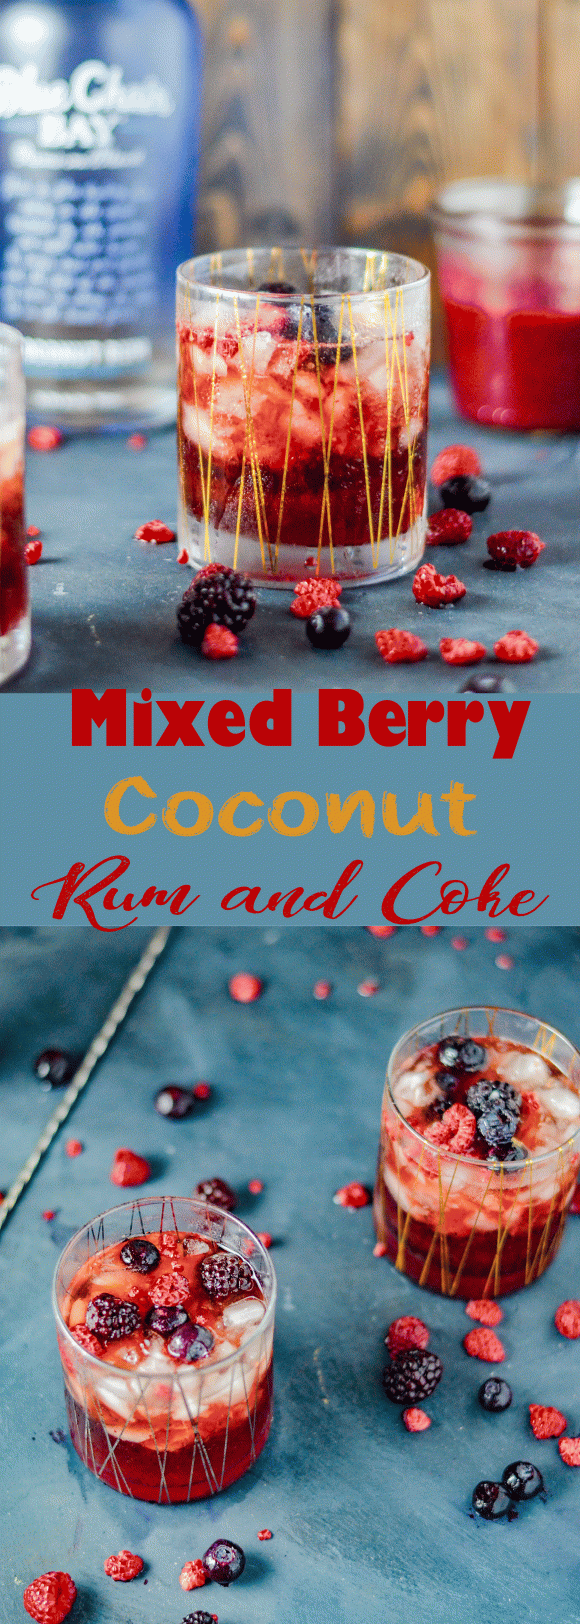 Mixed Berry Coconut Rum and Coke